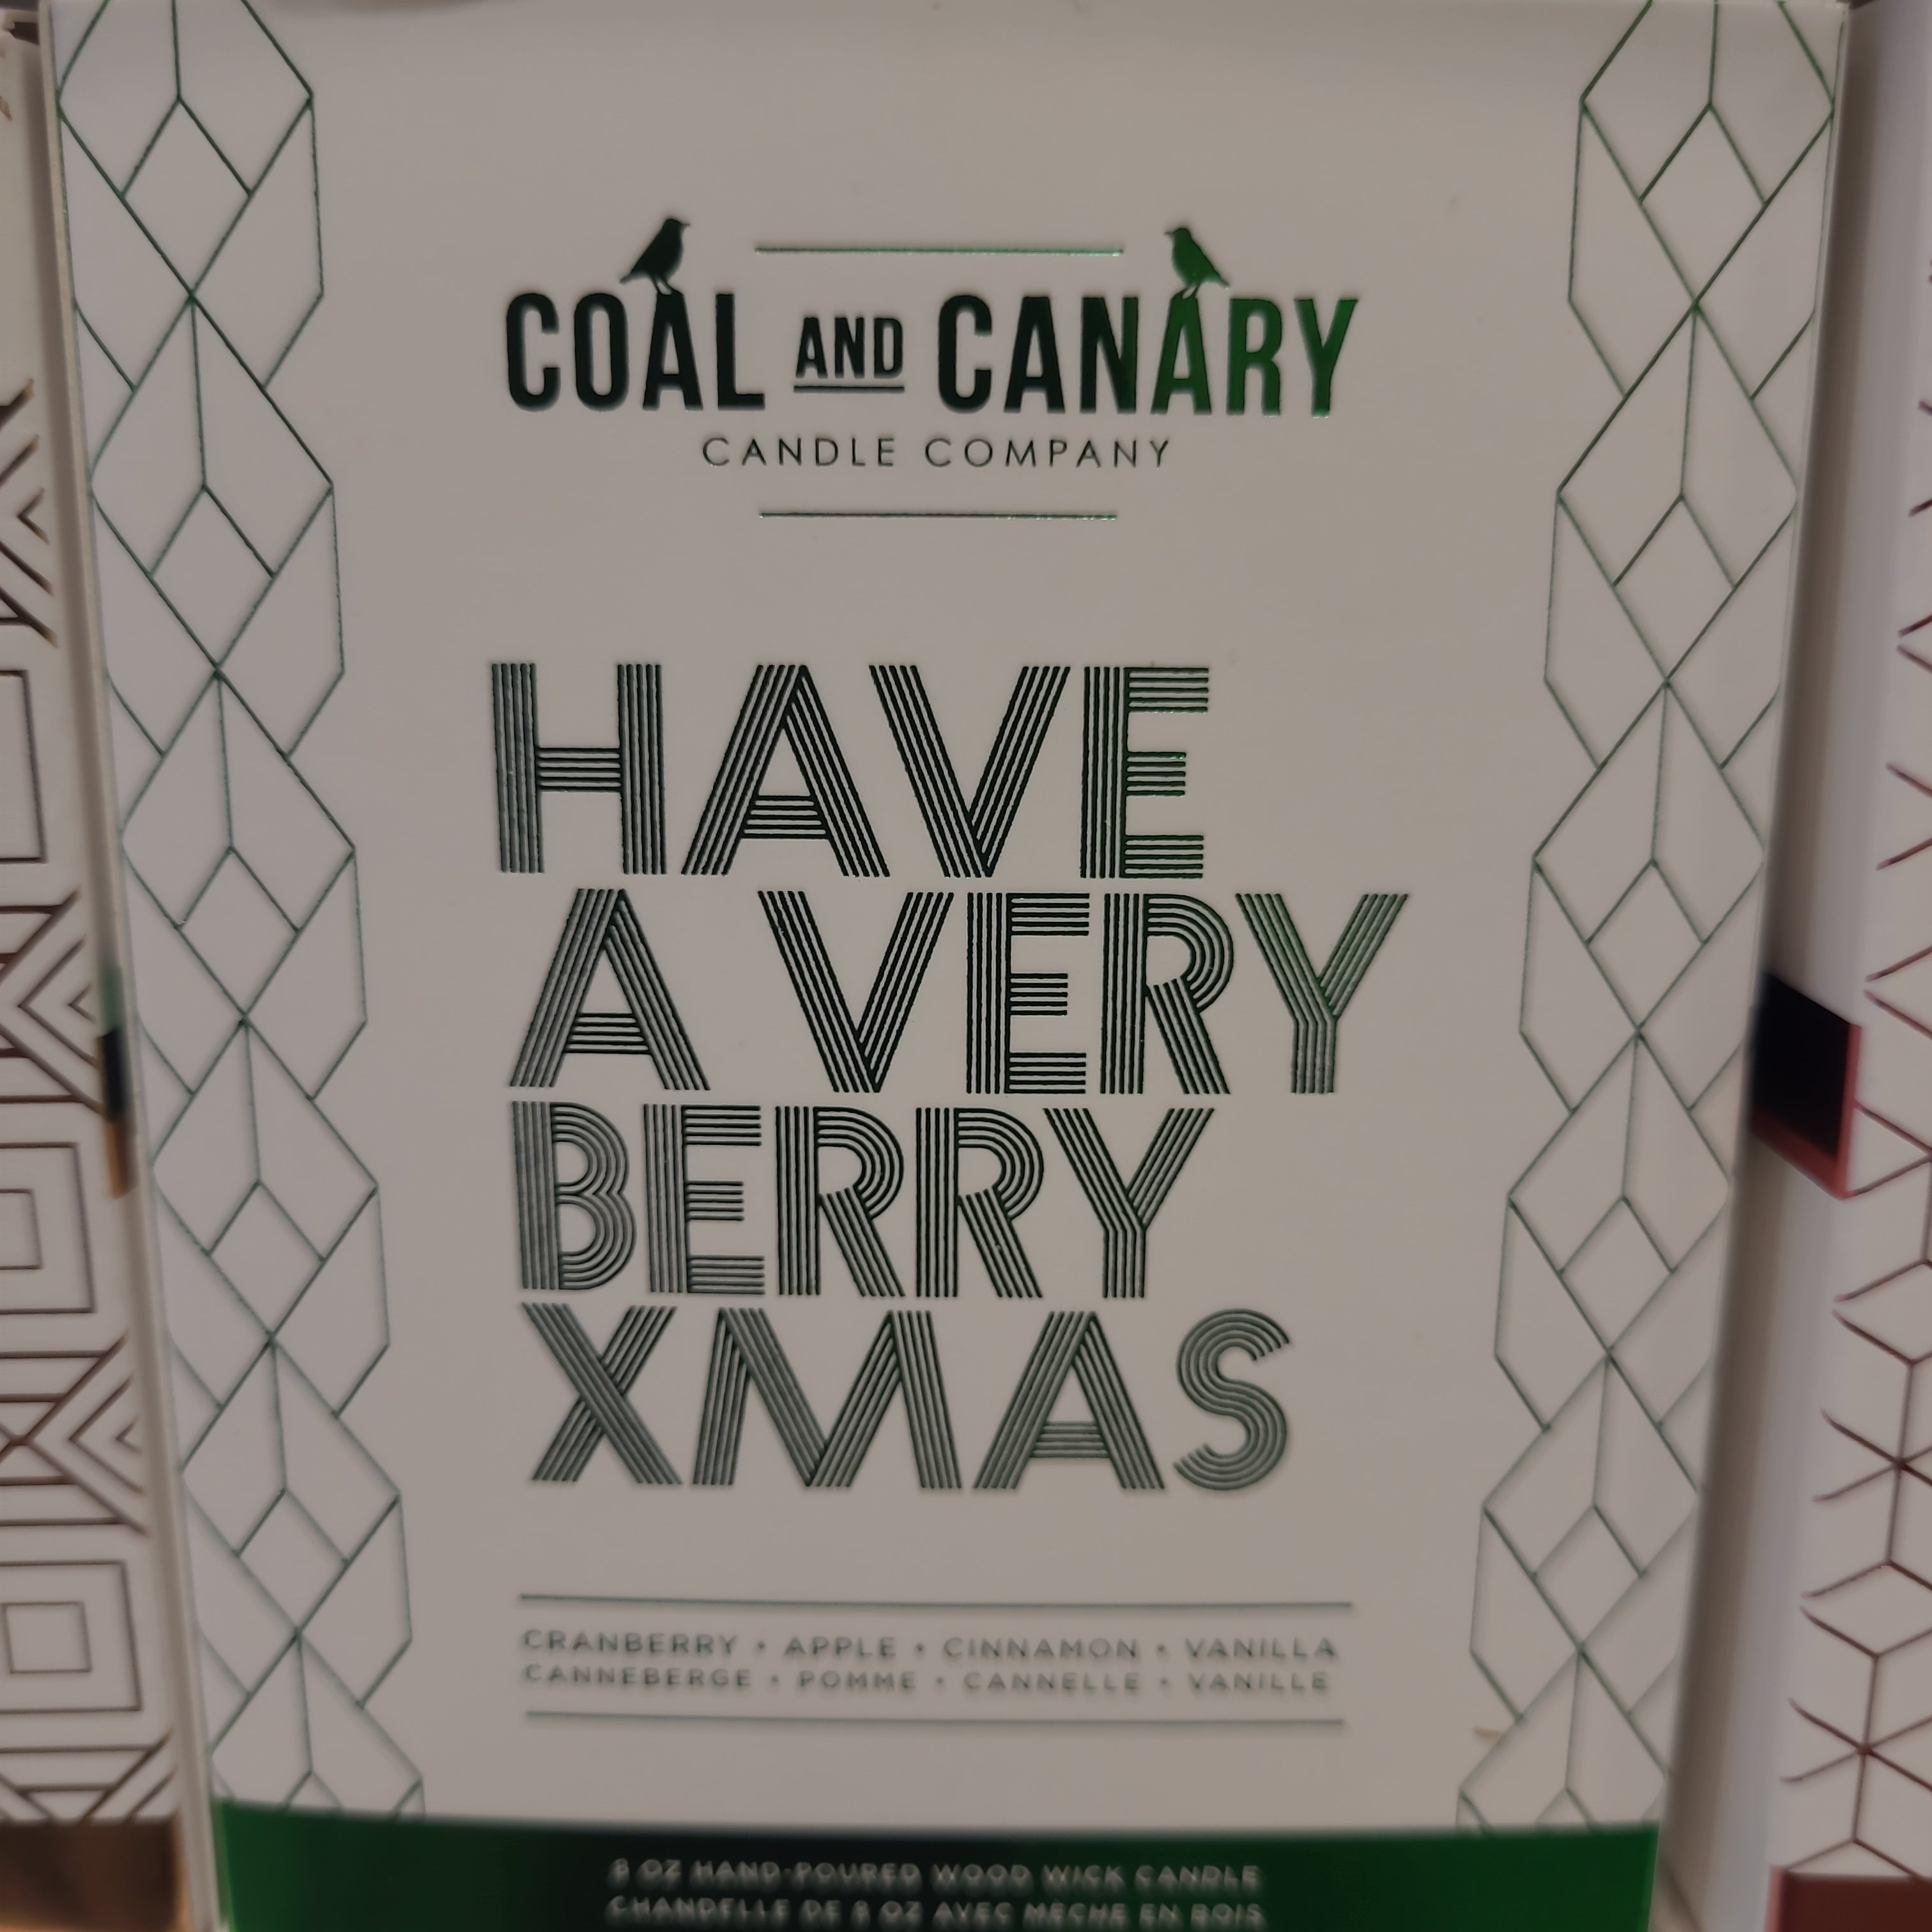 Coal and Canary -Have a very berry xmas